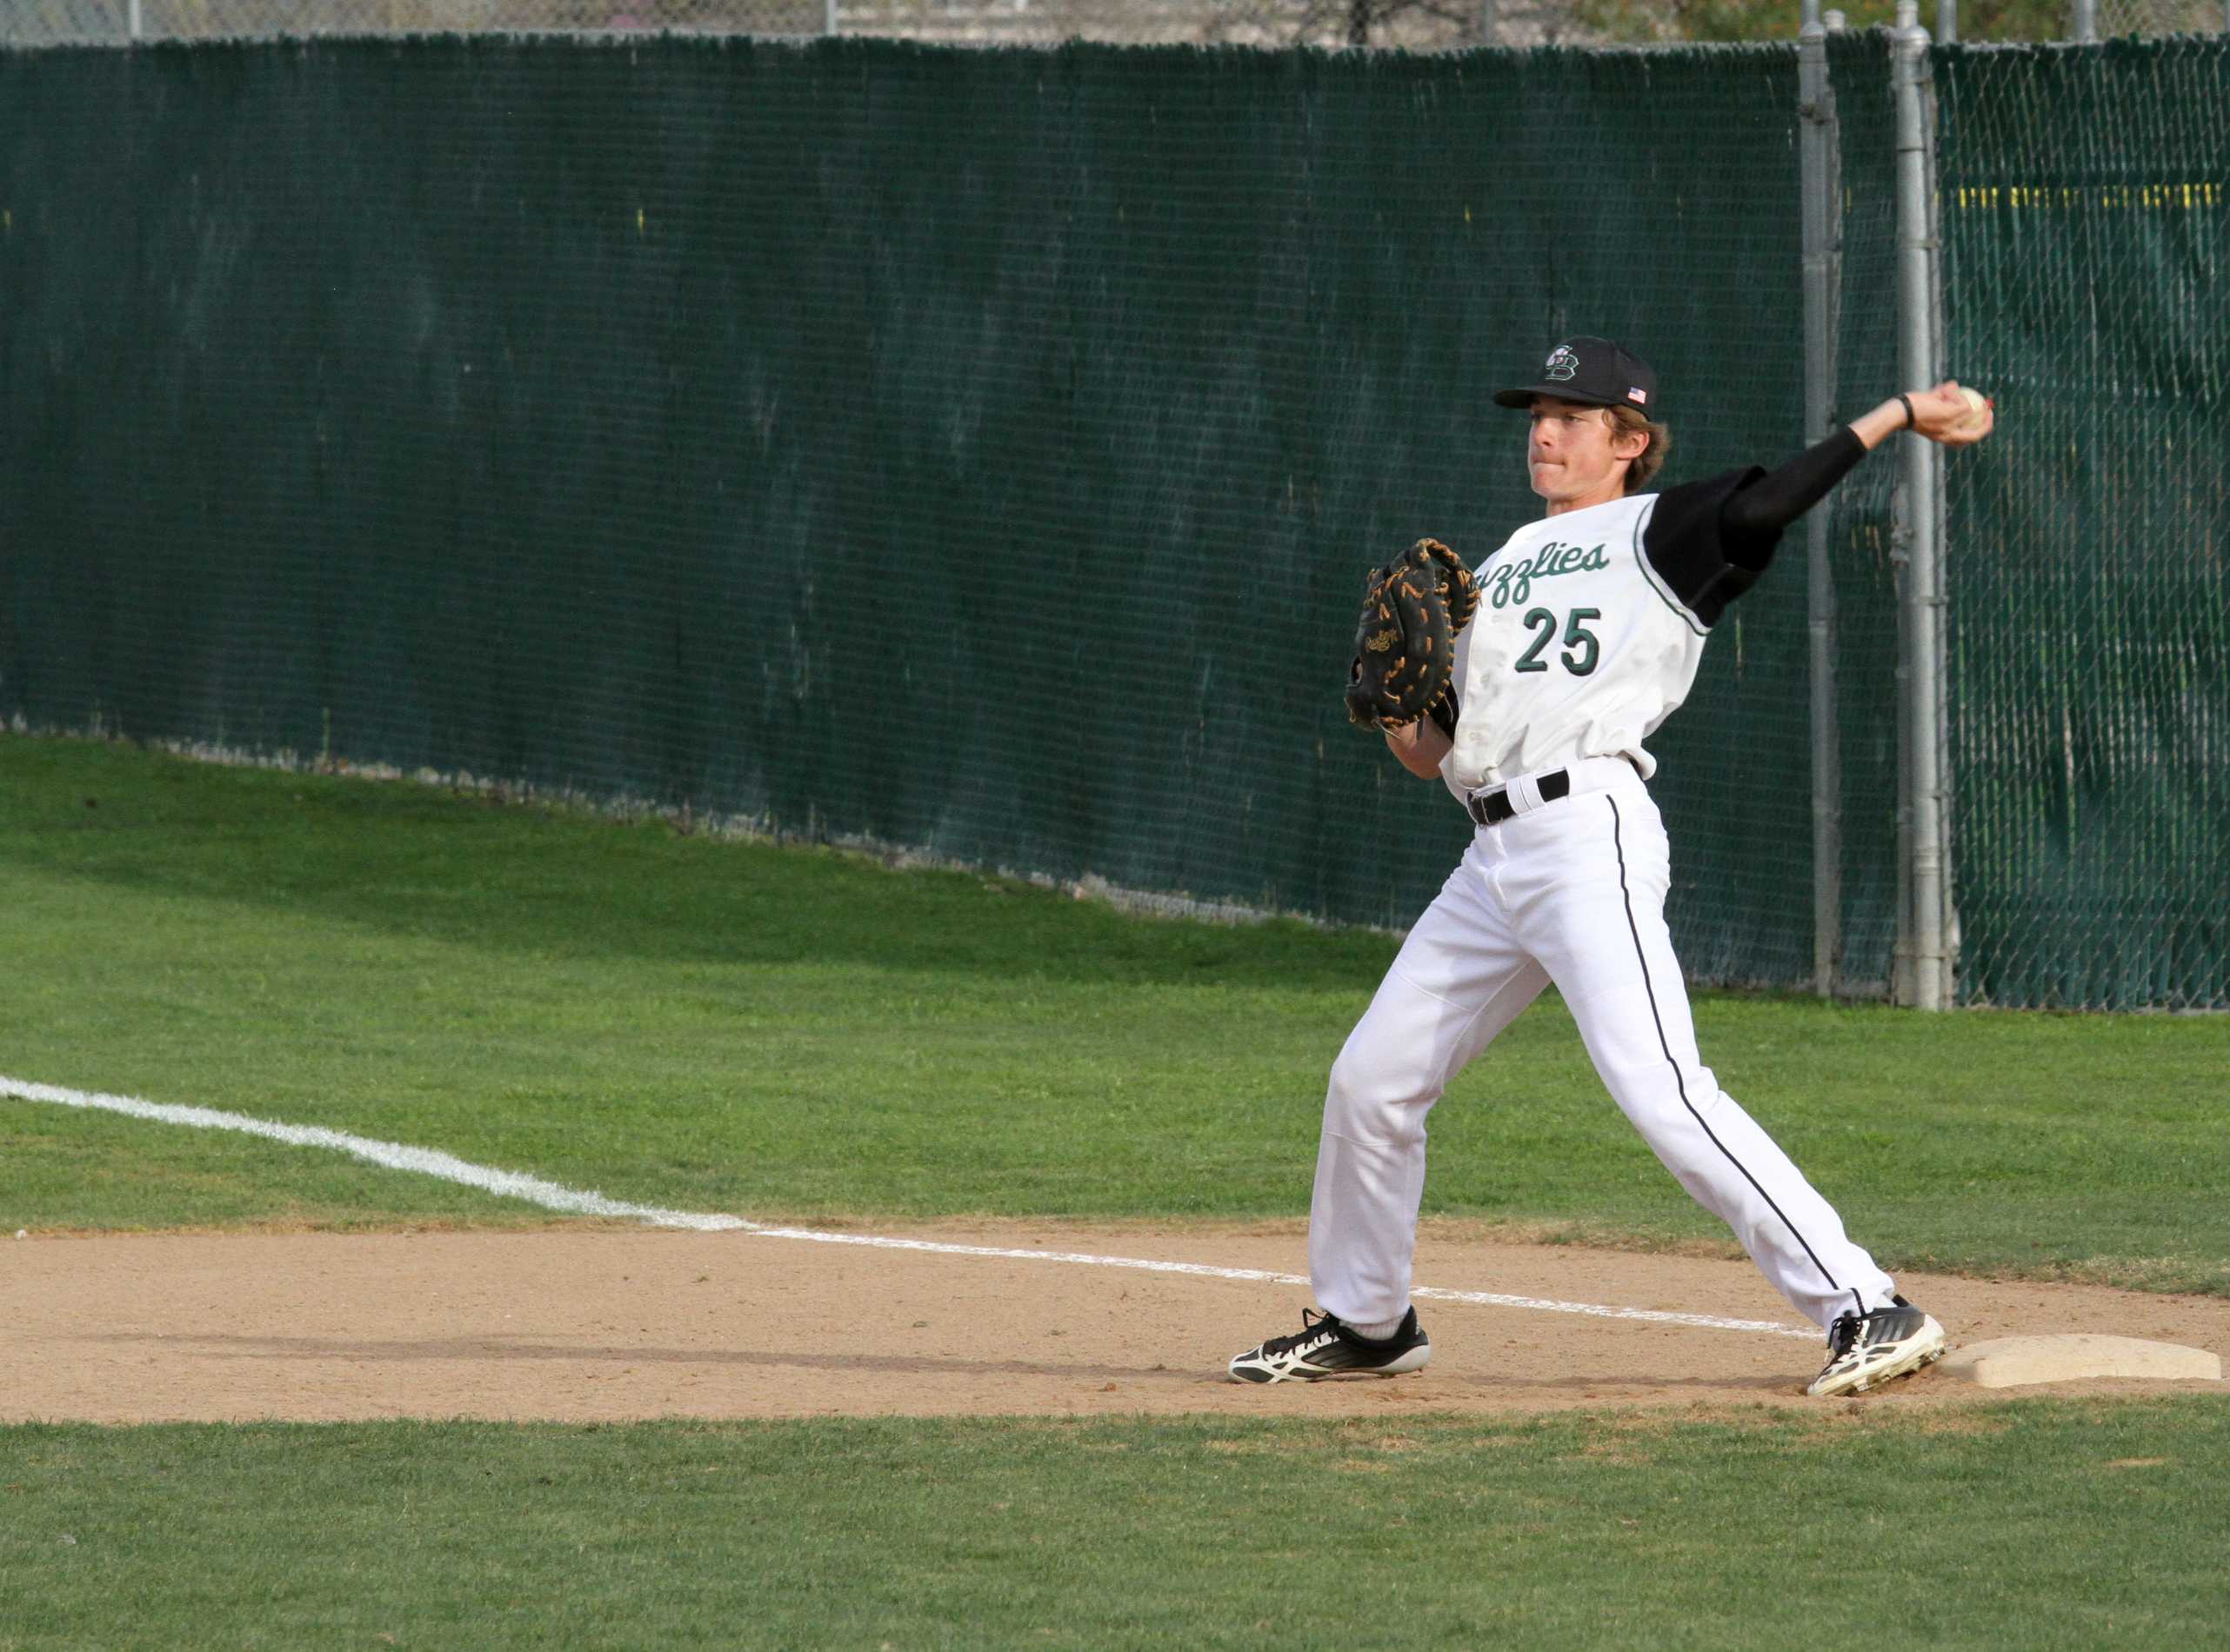 PRACTICE MAKES PERFECT: While playing a game against Rocklin on april 29th, freshman first baseman Bailey Diemer has the ball and practice some throws before they start playing. Since the GBHS baseball team got out three times, they switch positions to play defence. “We play serious and always have fun out on the field,” Diemer said. Photo by David Goni